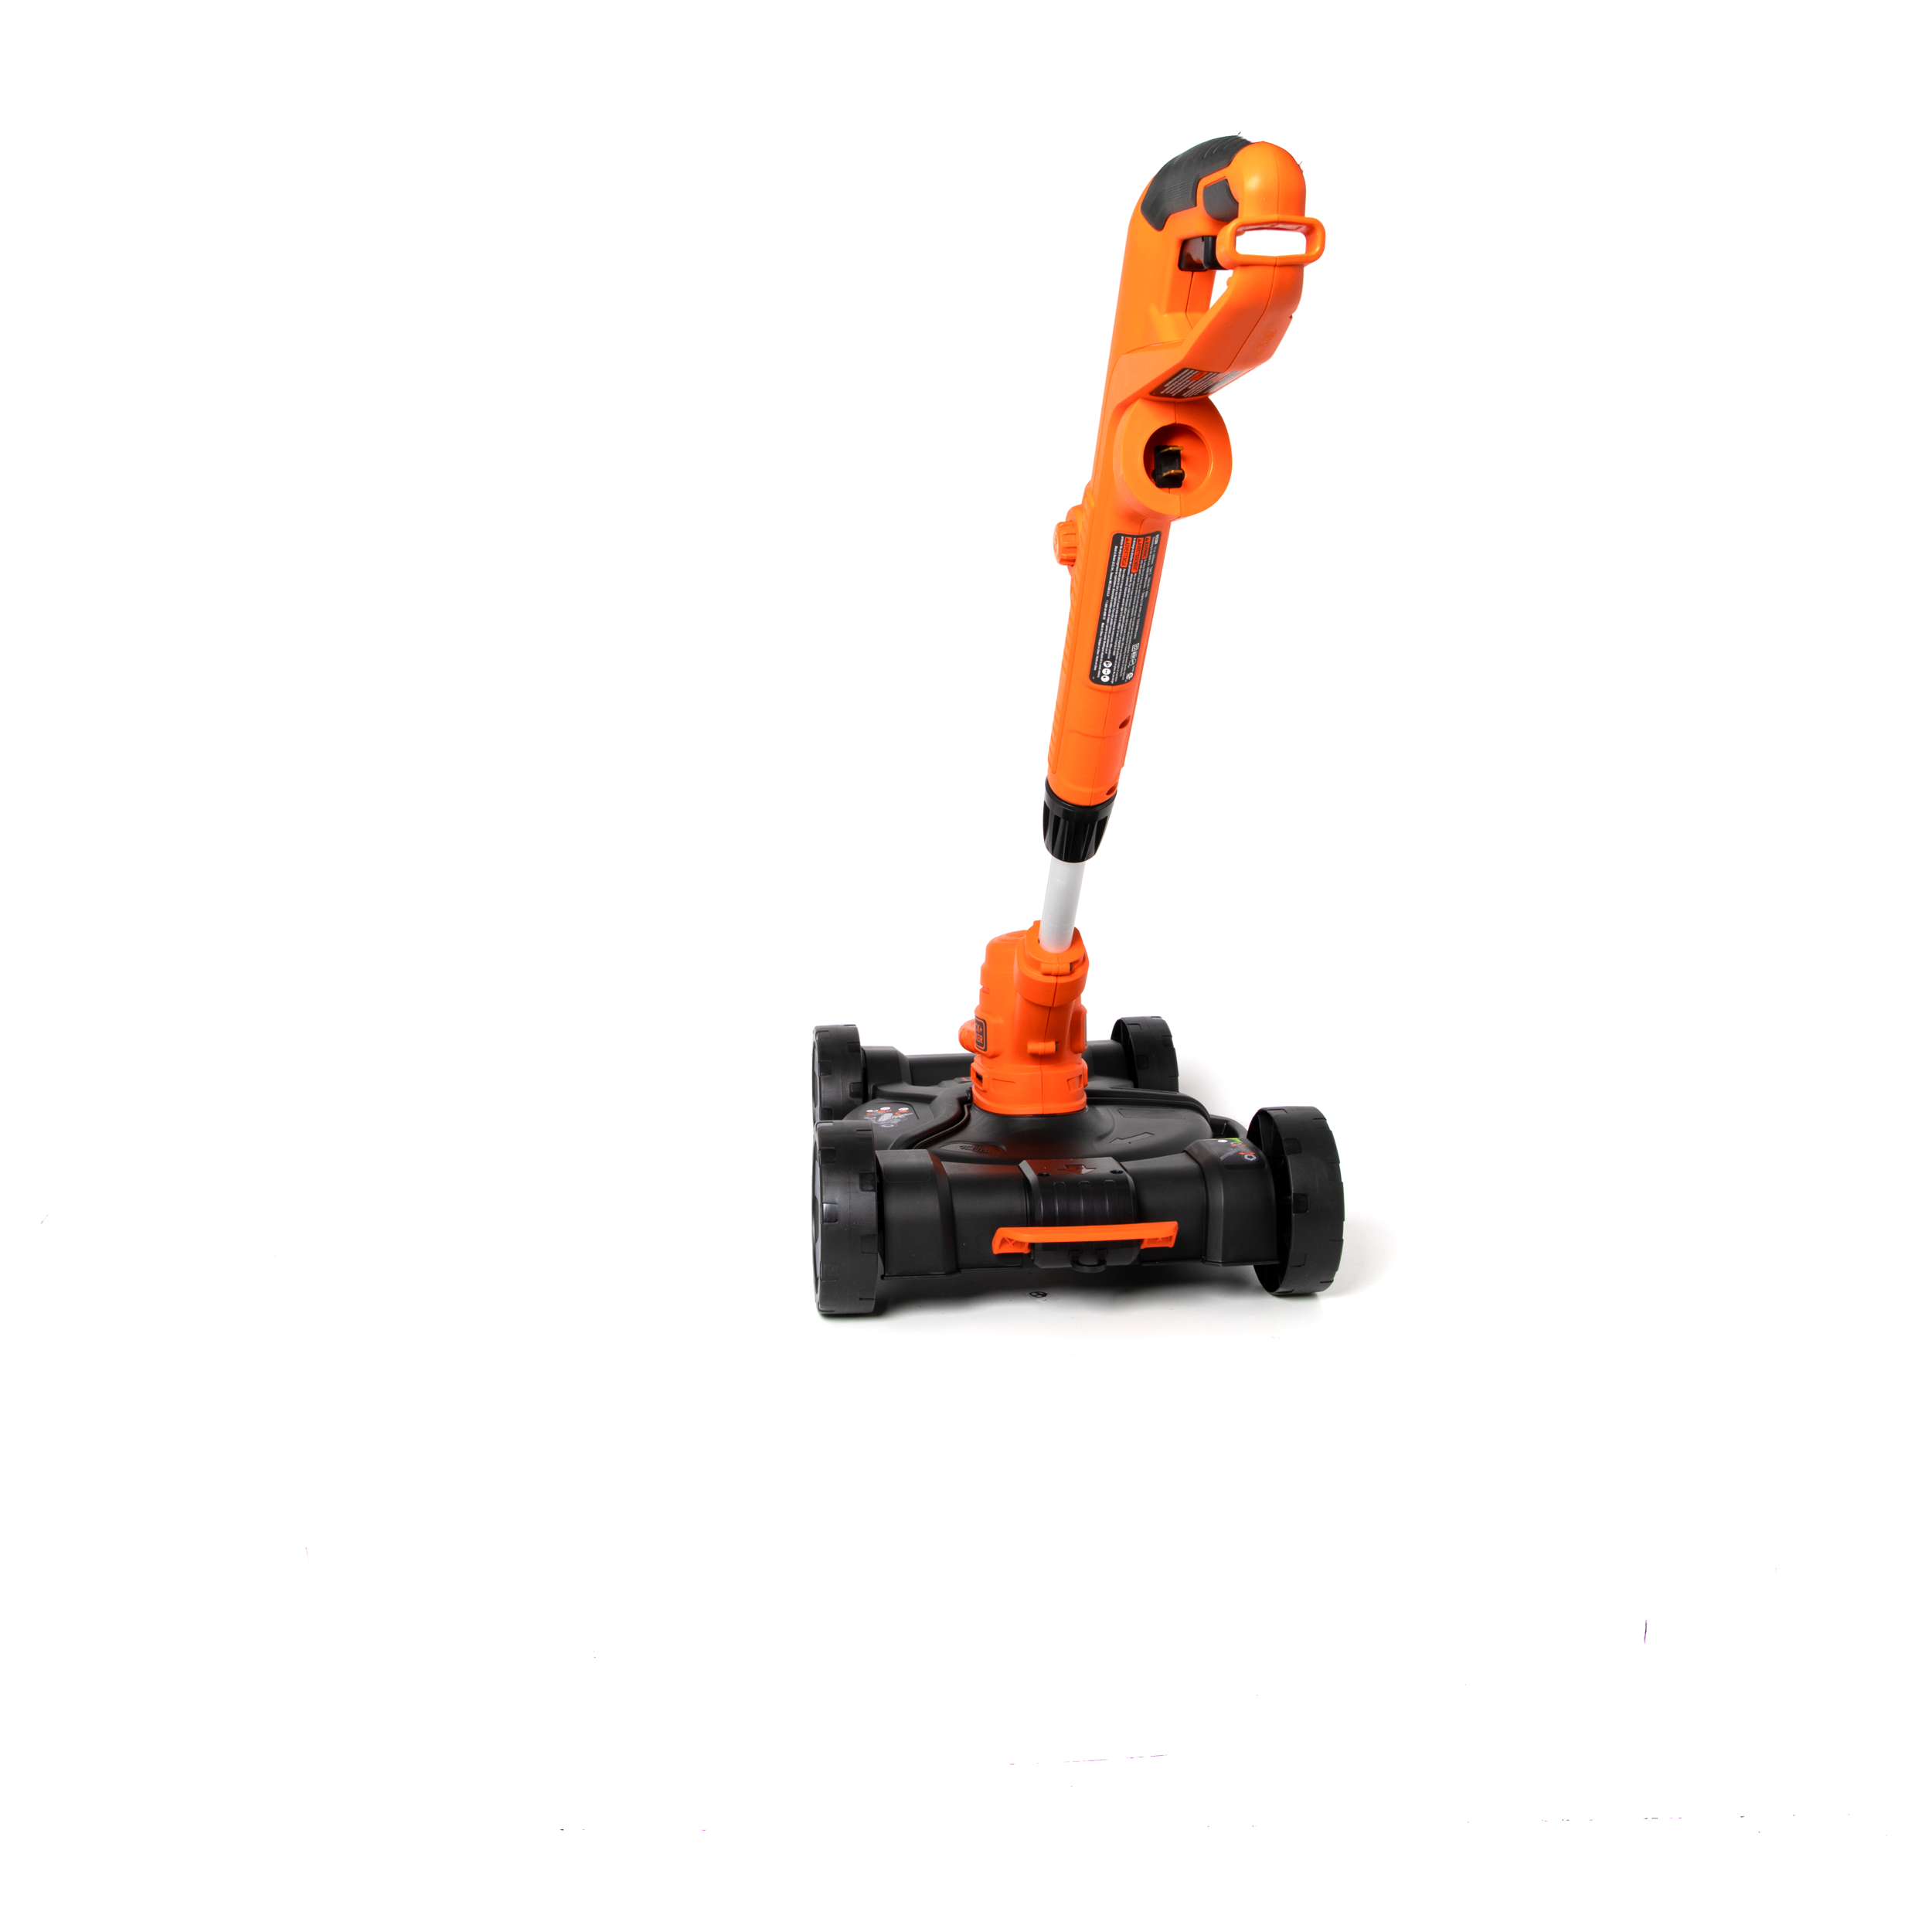 BLACK+DECKER 3-in-1 String Trimmer/Edger & Lawn Mower, 6.5-Amp, 12-Inch,  Corded (MTE912) (Power cord not included), Black/Red